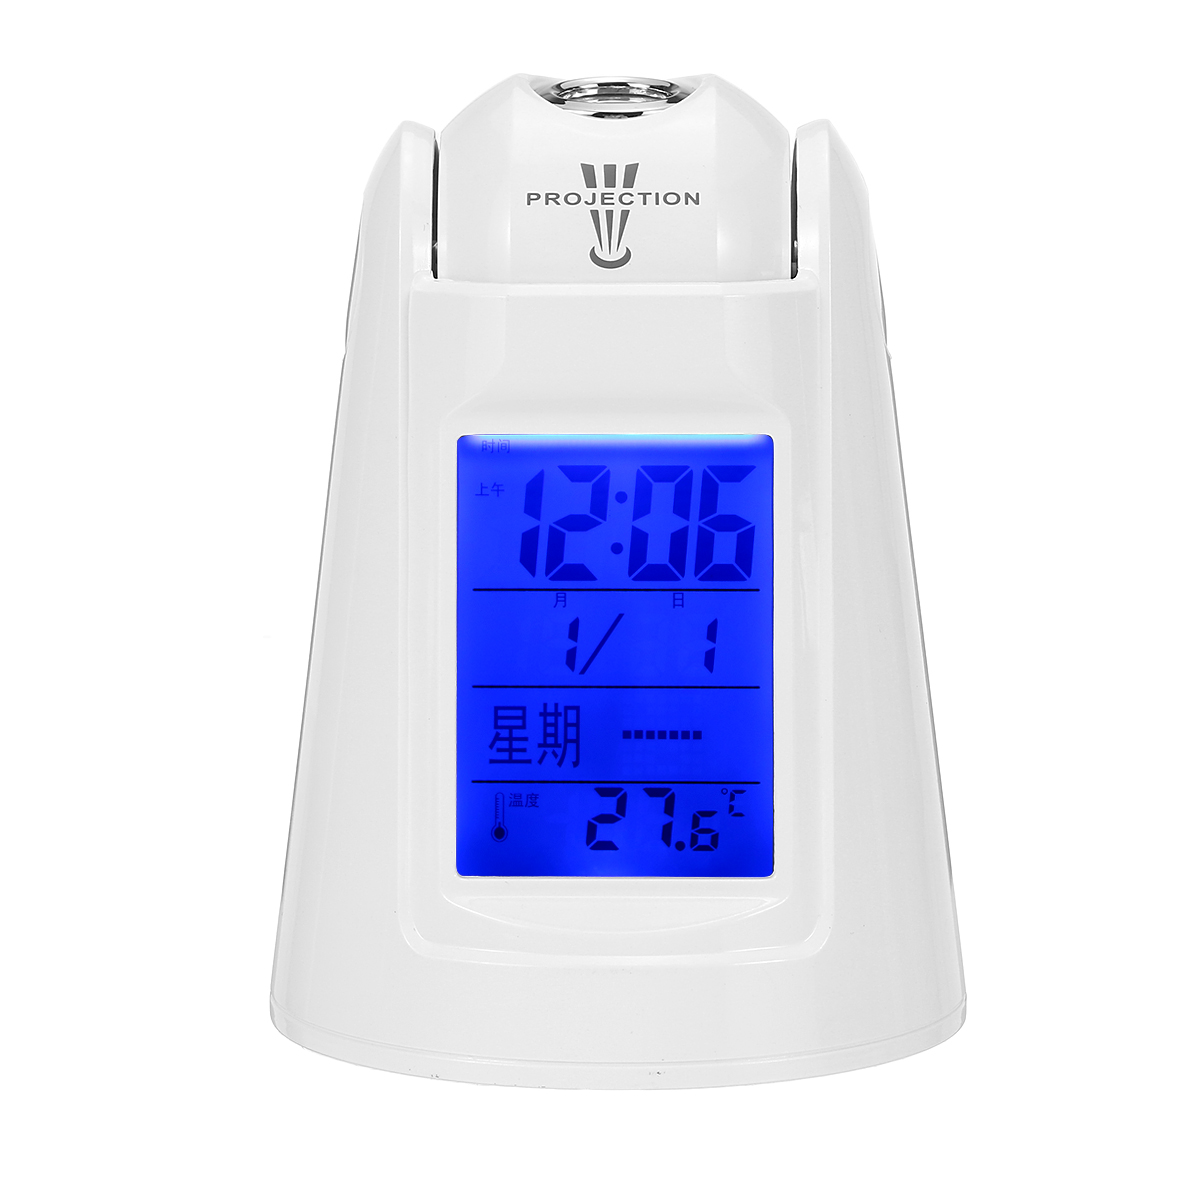 LED-Projection-Alarm-Clock-Thermometer-Snooze-Voice-Timing-Nightlight-Kids-Wake-1709073-6